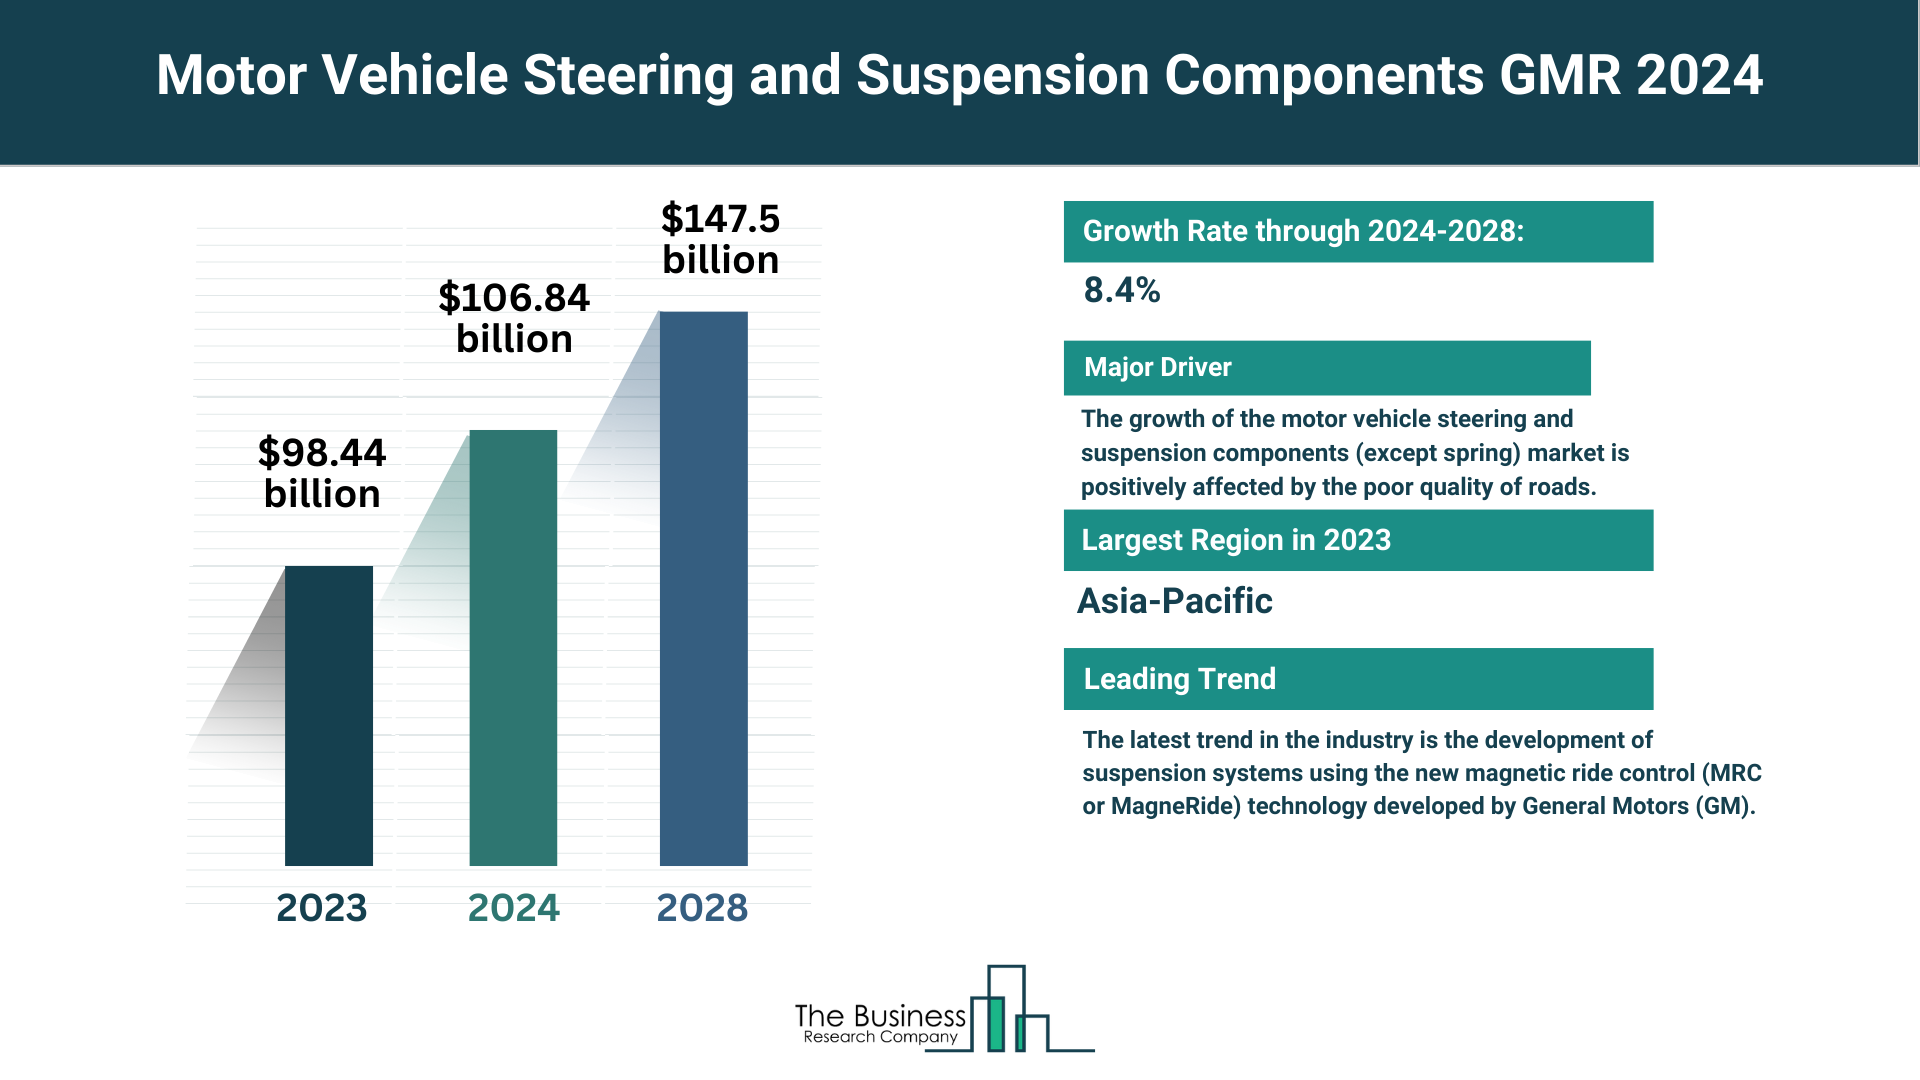 Global Motor Vehicle Steering and Suspension Components (except Spring) Market